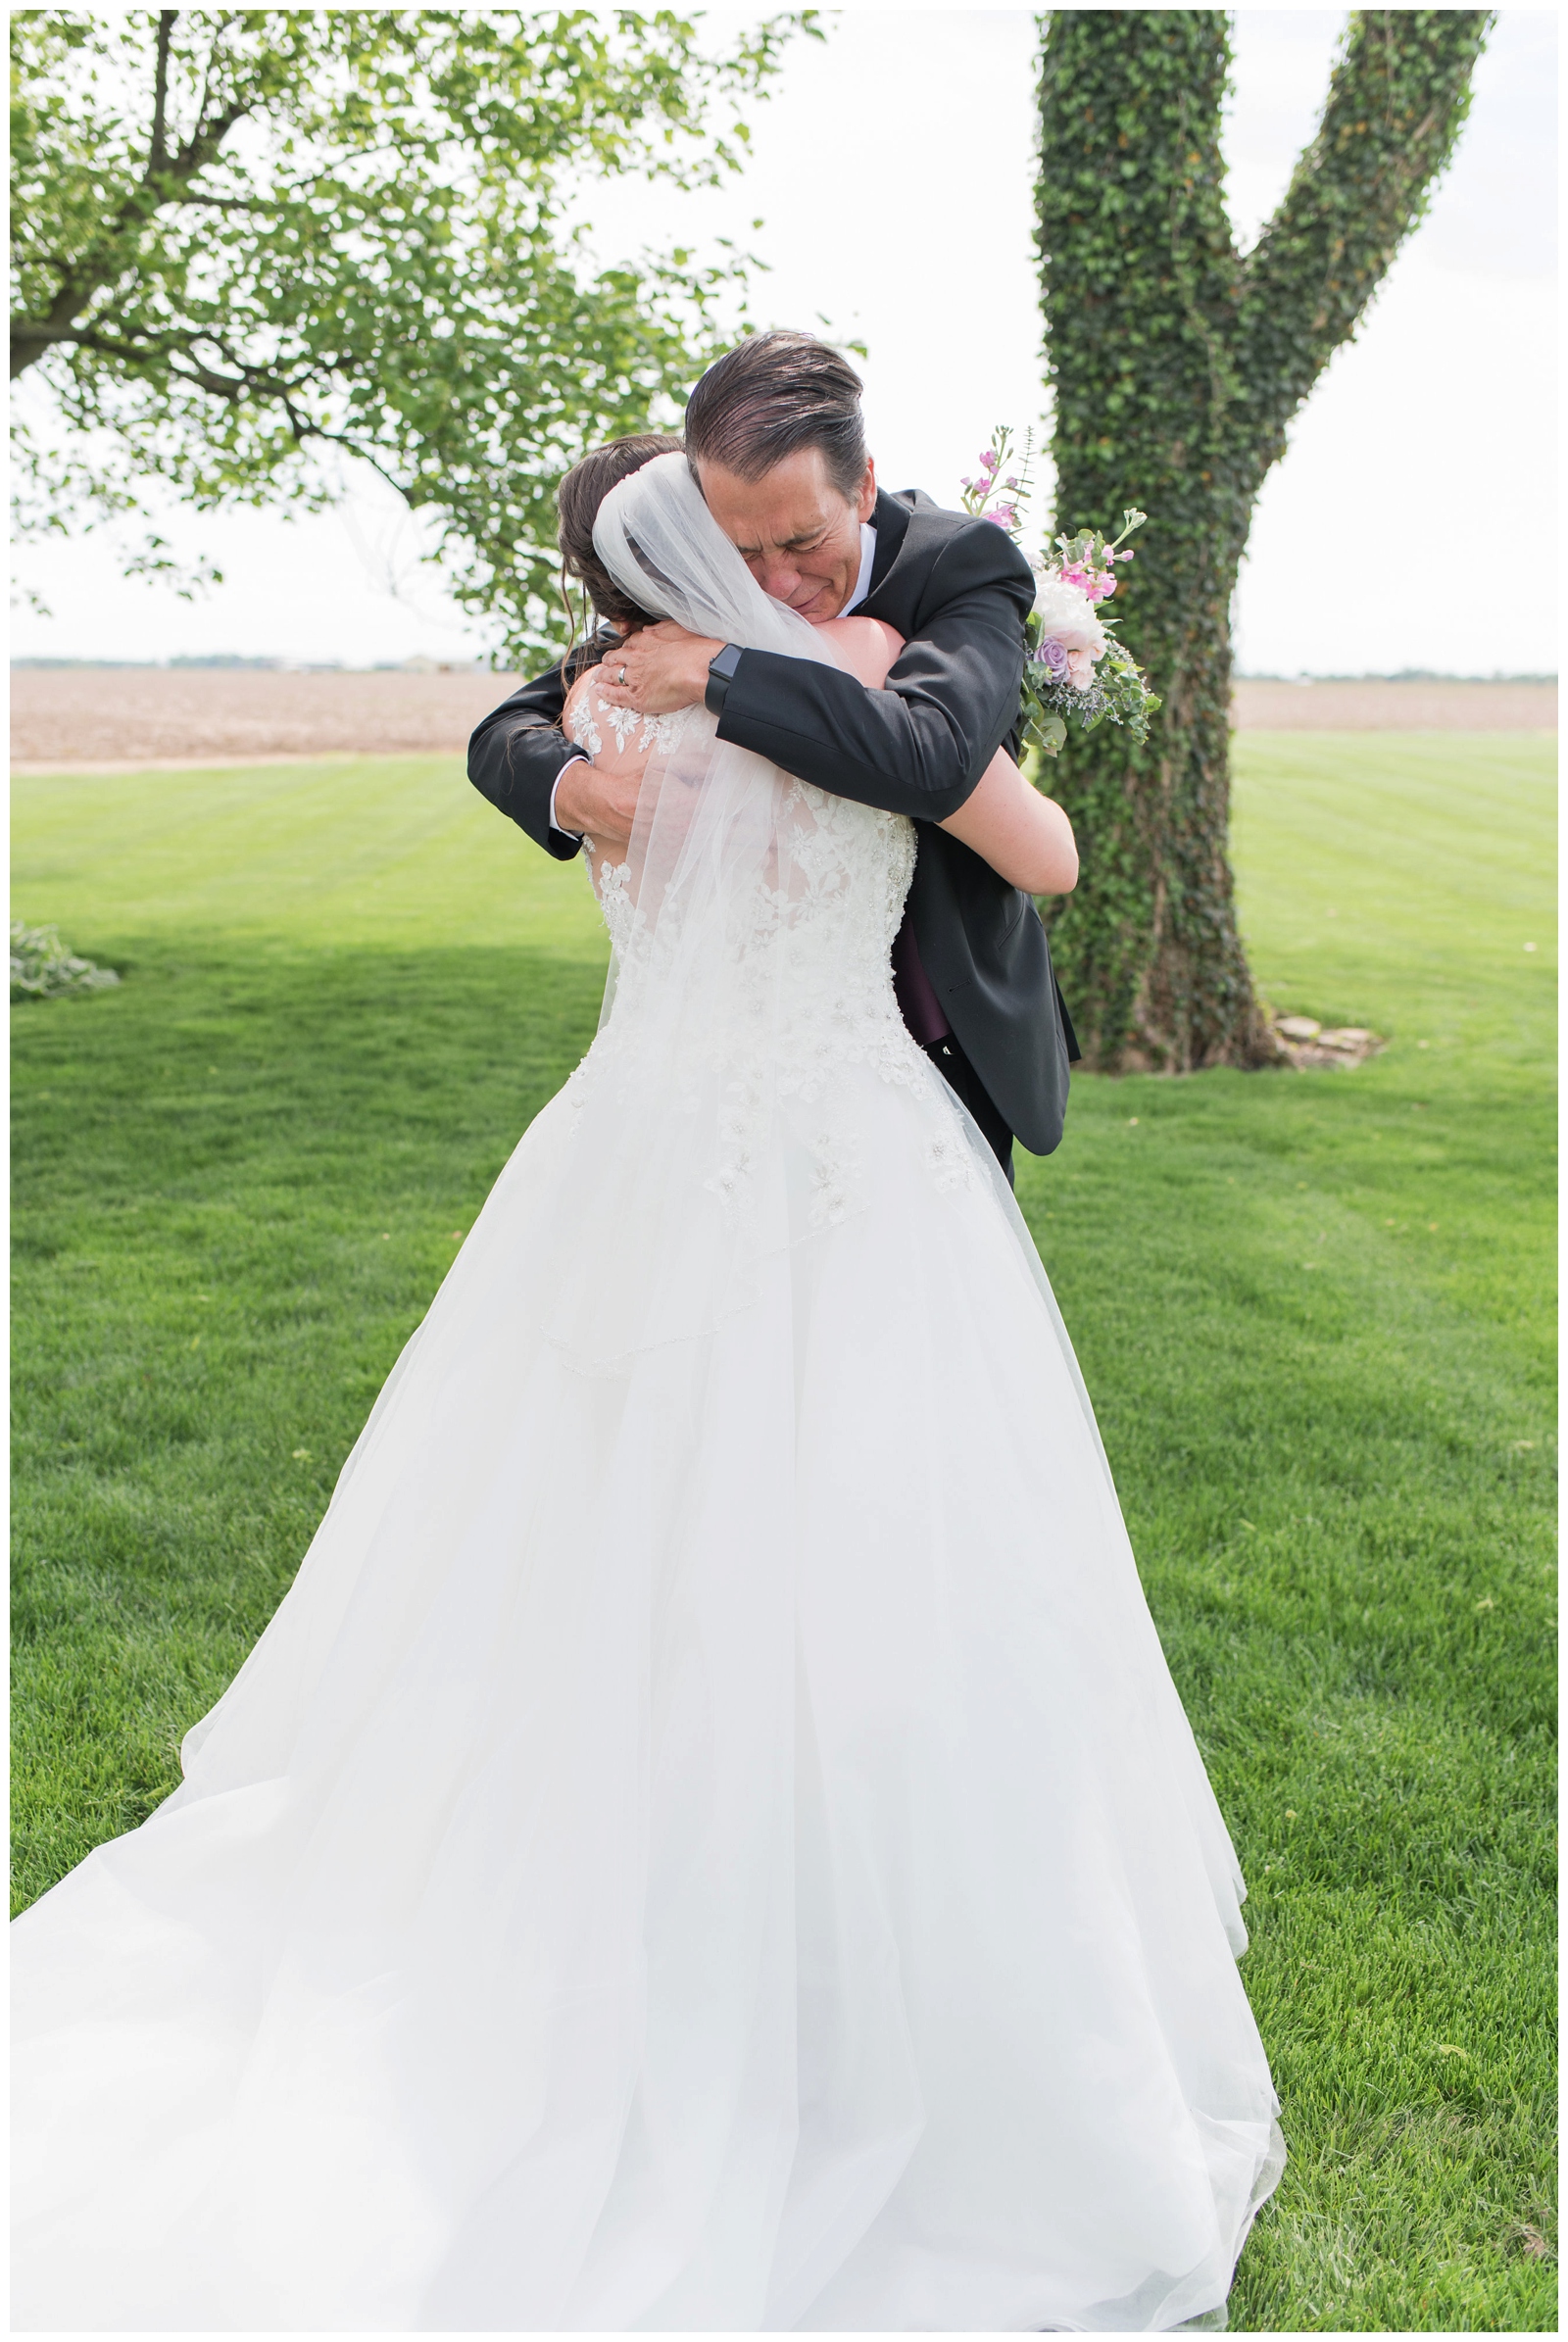 emotional father hugs bride on wedding day during first look